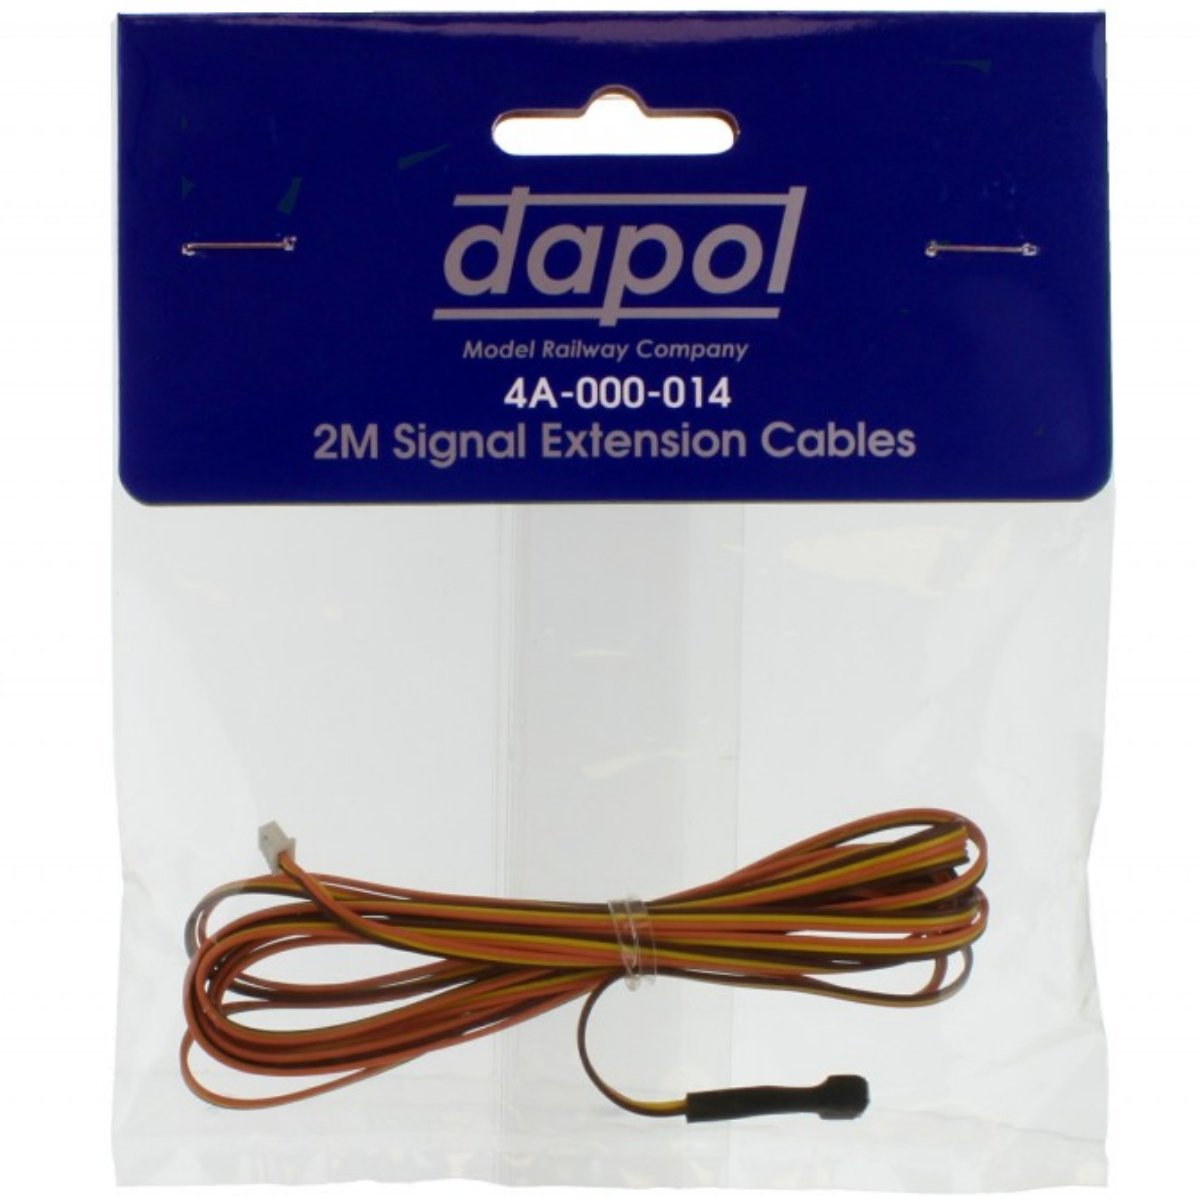 Dapol 4A-000-014 Signal Extension Cable - 2M Length